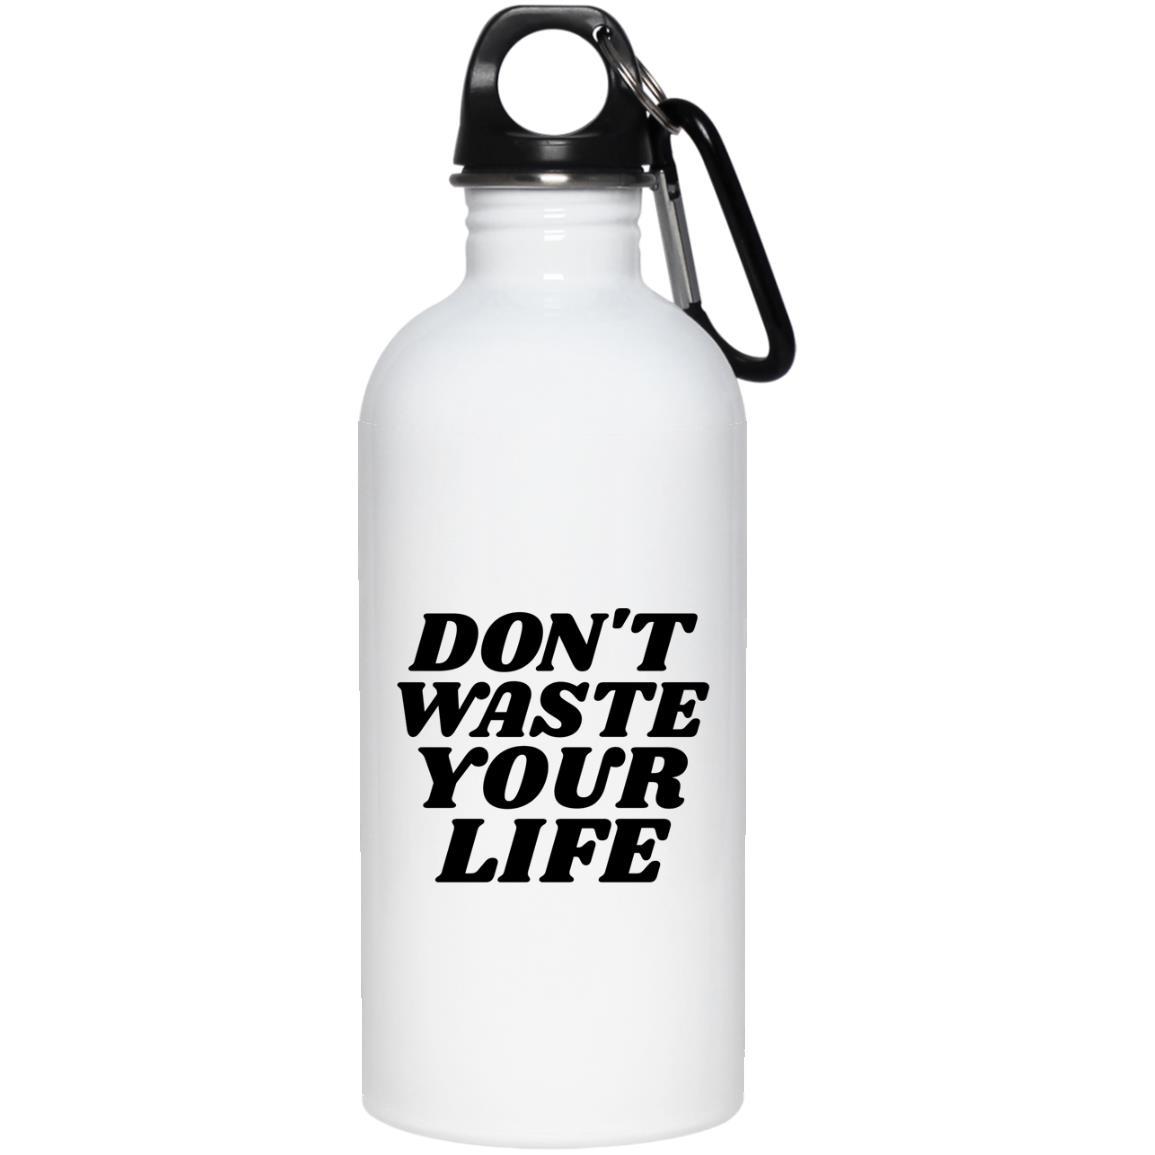 Don't Waste Your Life (20oz Steel Water Bottle) - SDG Clothing